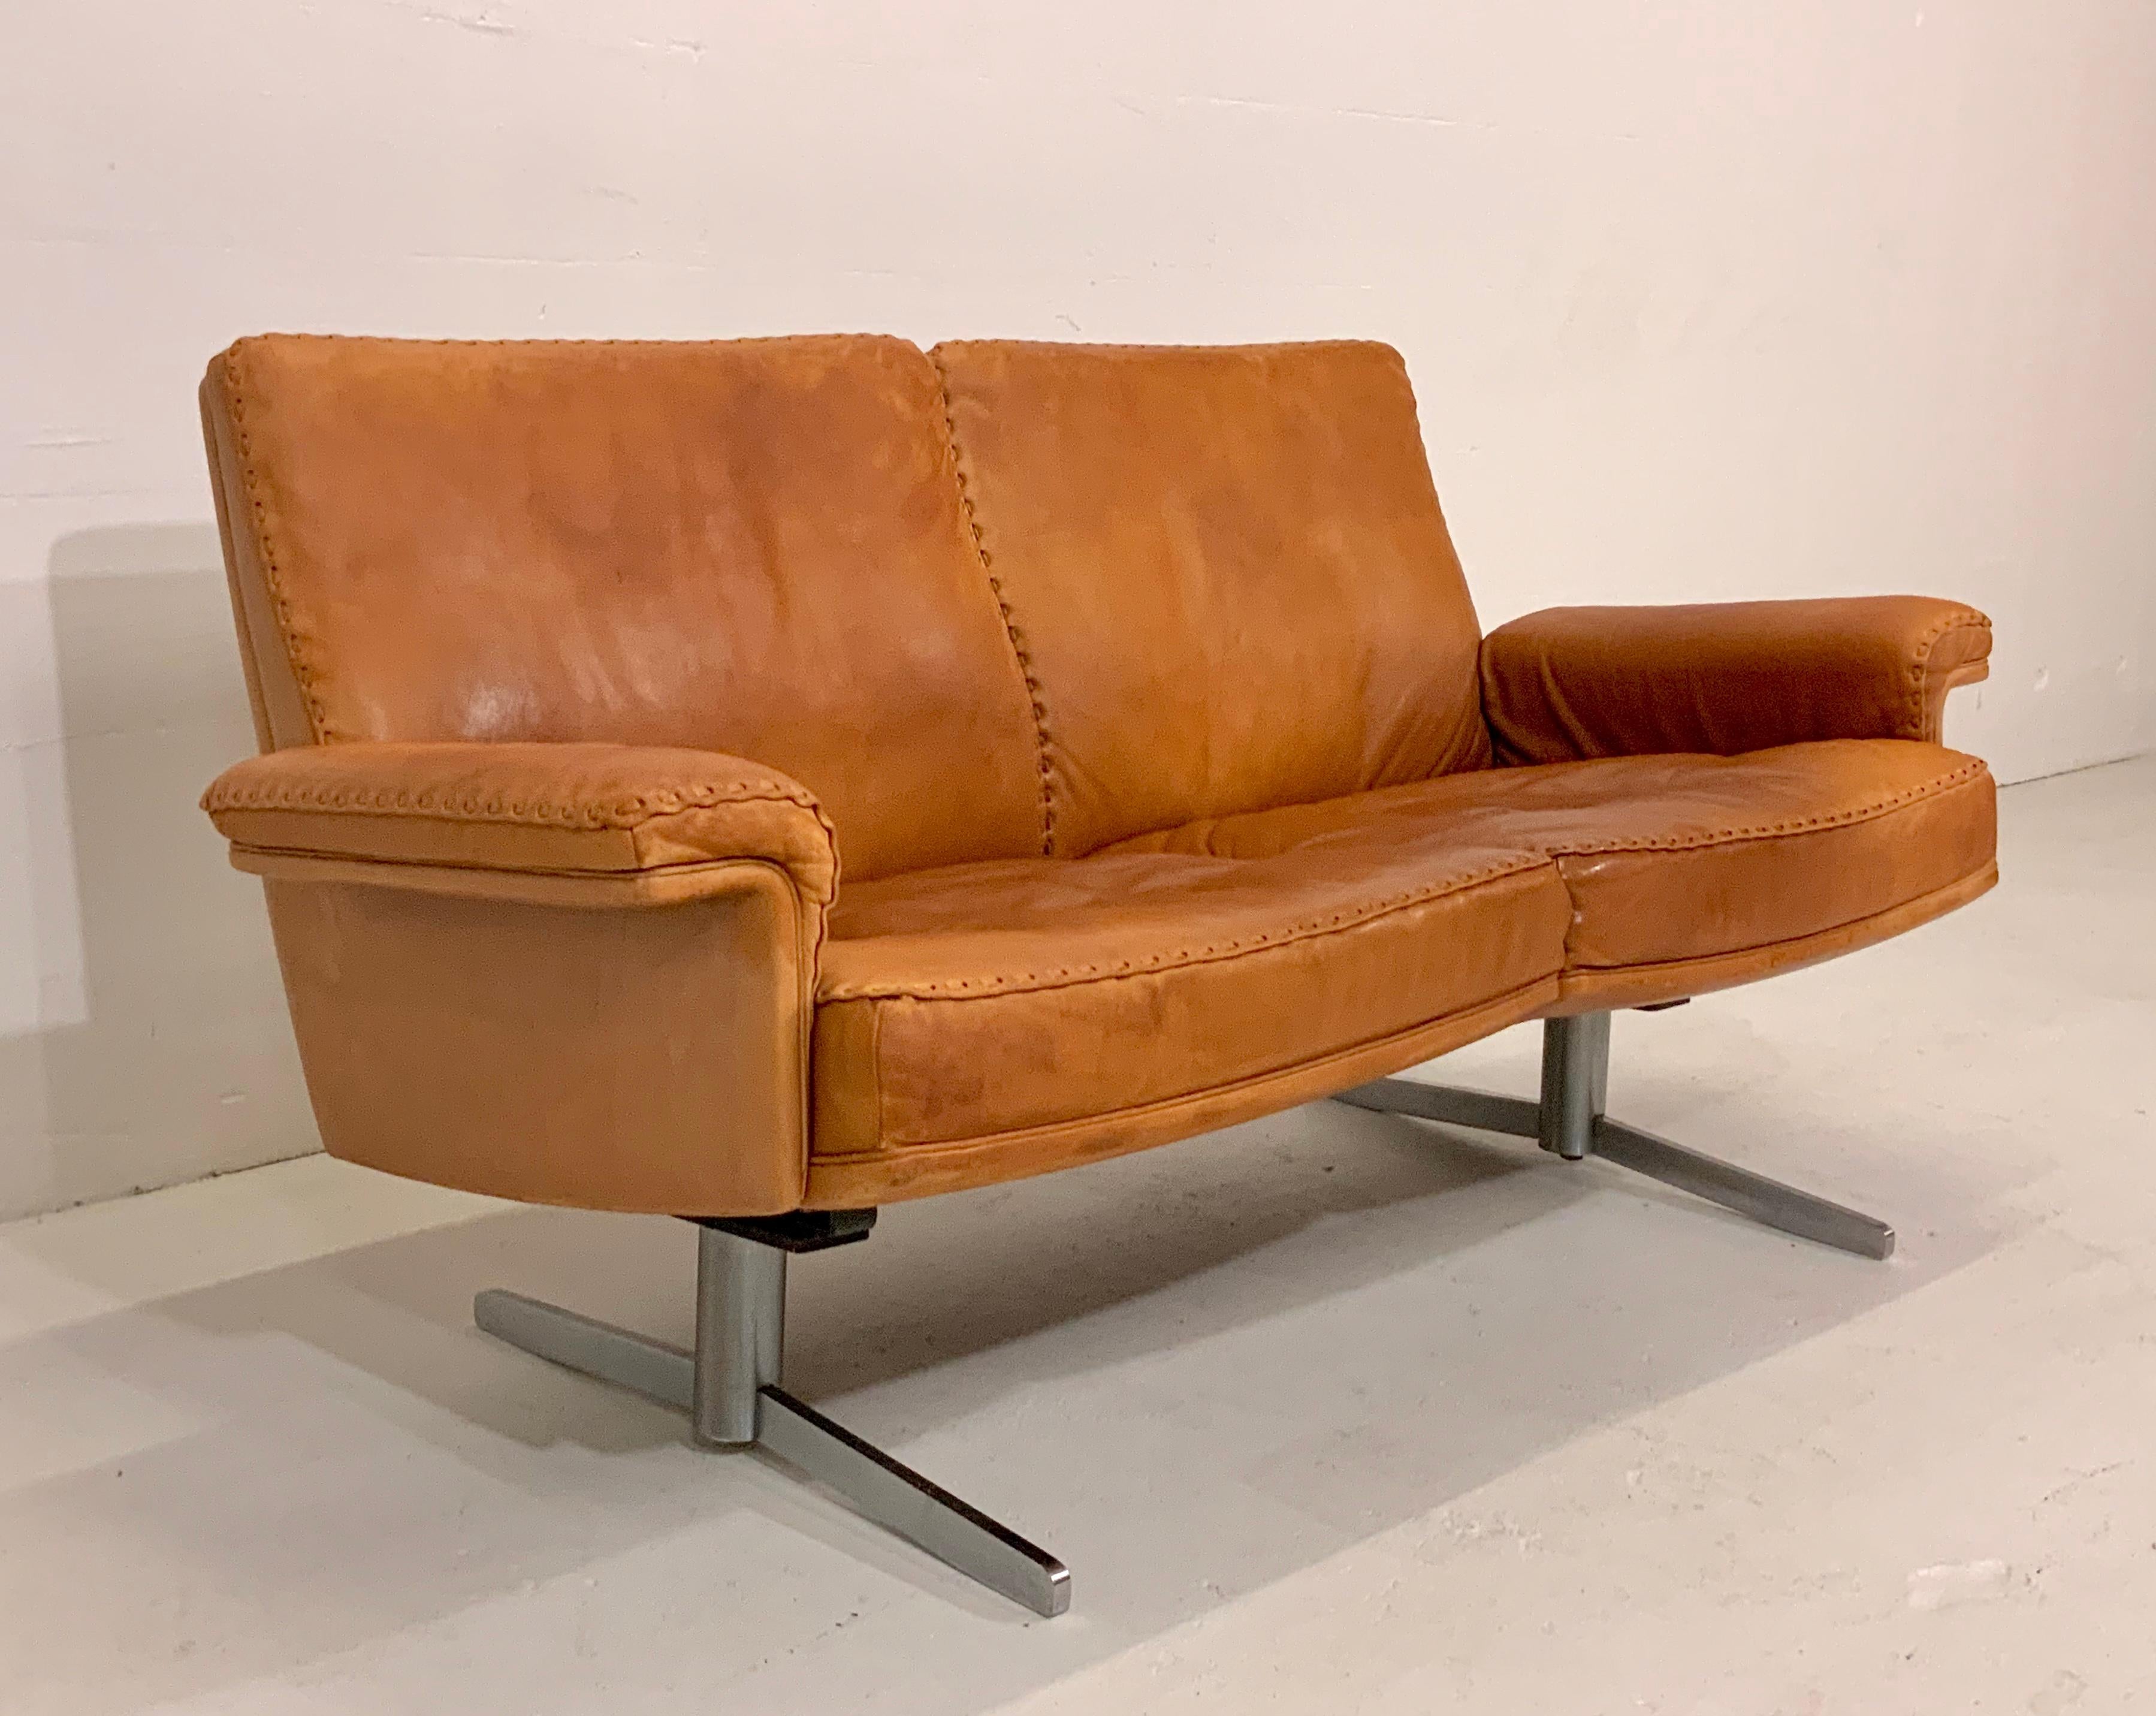 This very rare iconic Mid-Century Modern leather lounge sofa is from the renowned leather manufacturer De Sede (Switzerland) and a popular 1960s-1970s vintage design Classic. It comes in smooth and soft aniline cognac brown leather and is from